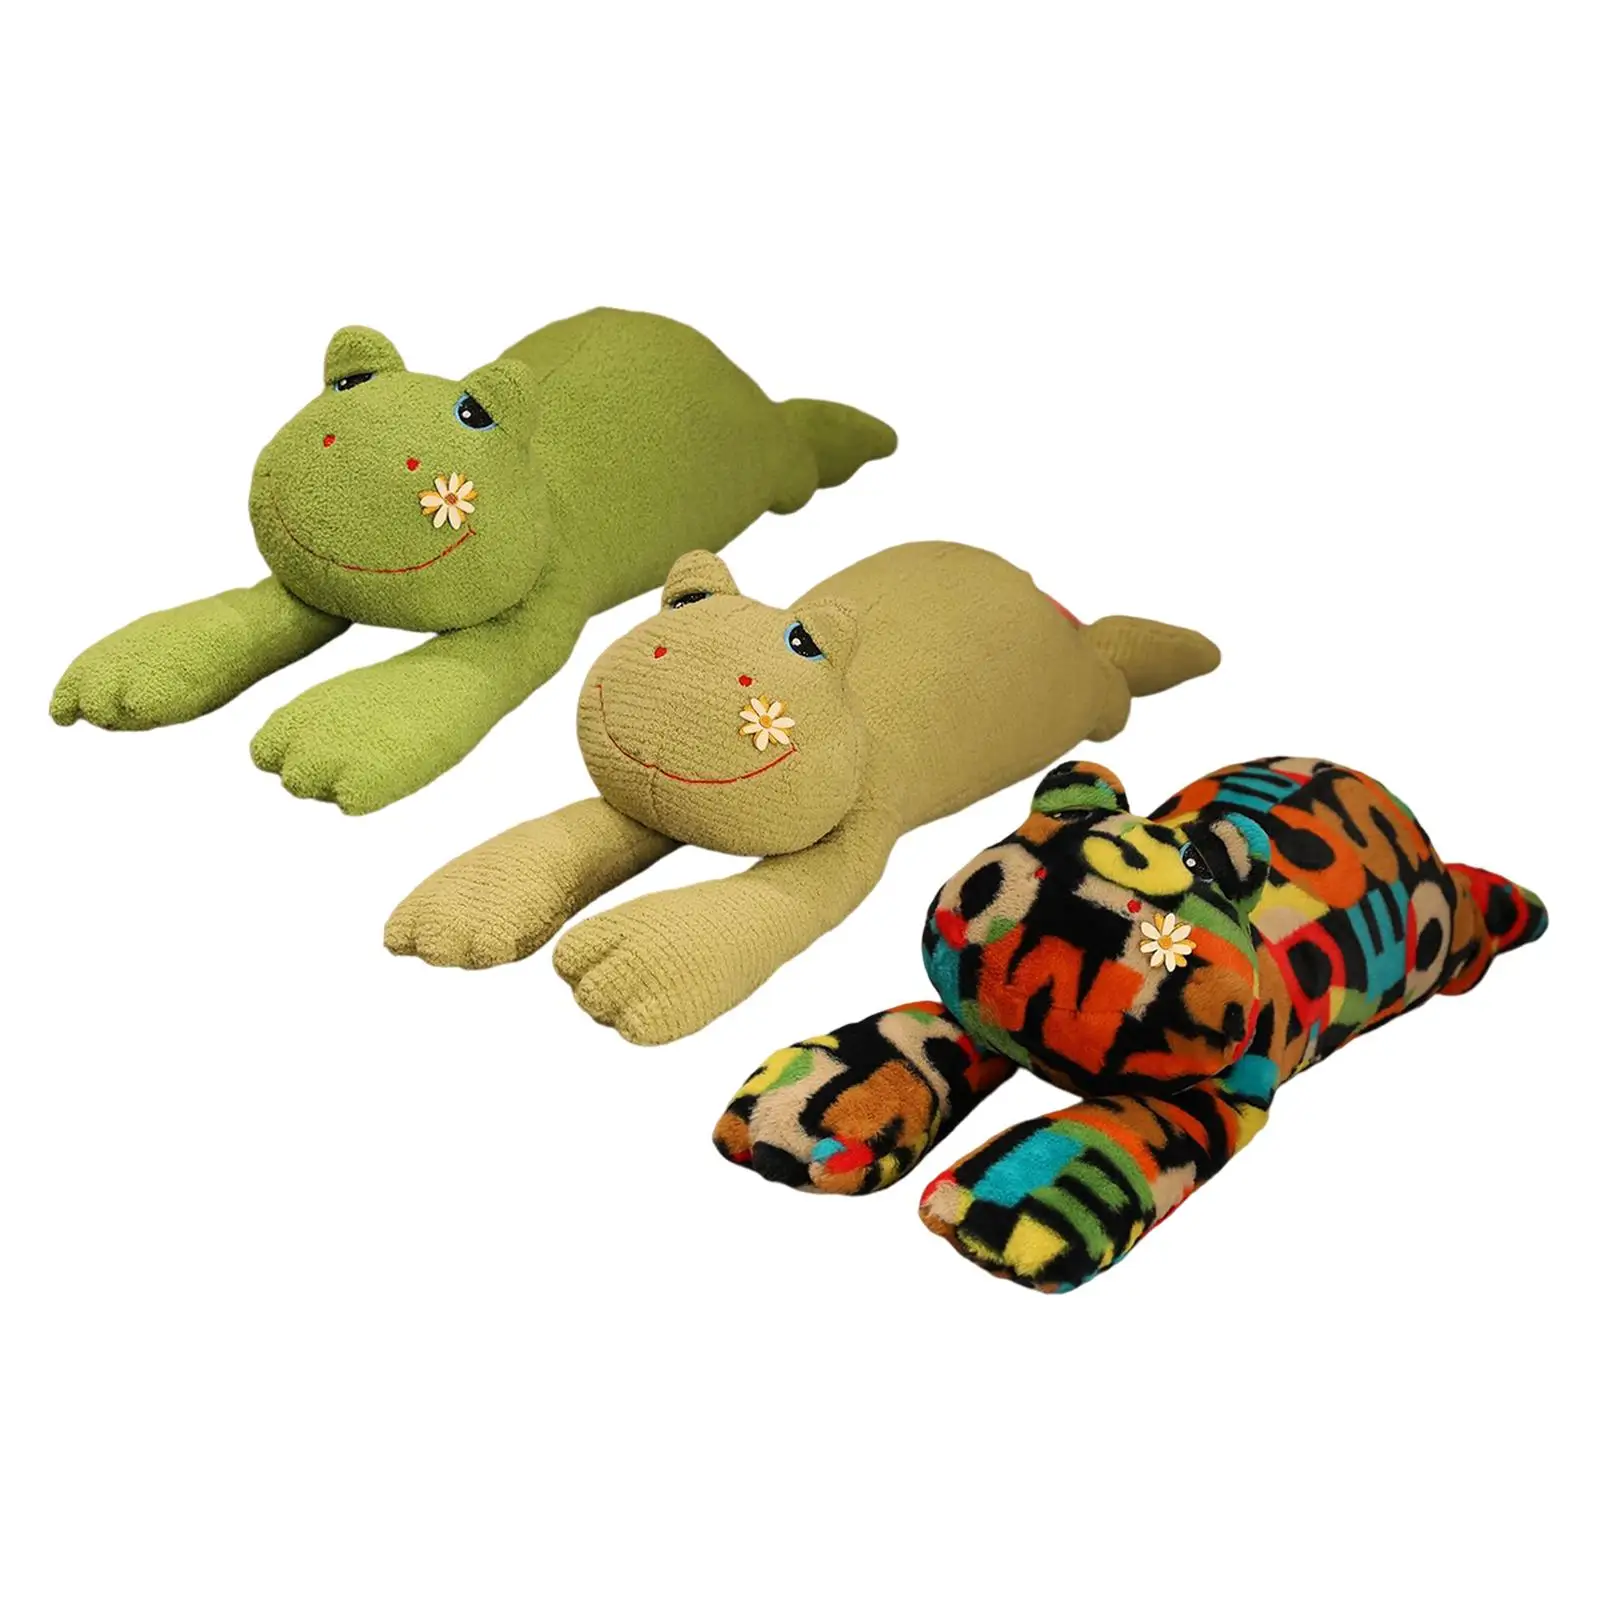 Cuddly Frog Plush Doll Pillow Home Decoration Cute Stuffed Animal for Theme Party Sofa Decor Birthday Gifts Children Toddlers